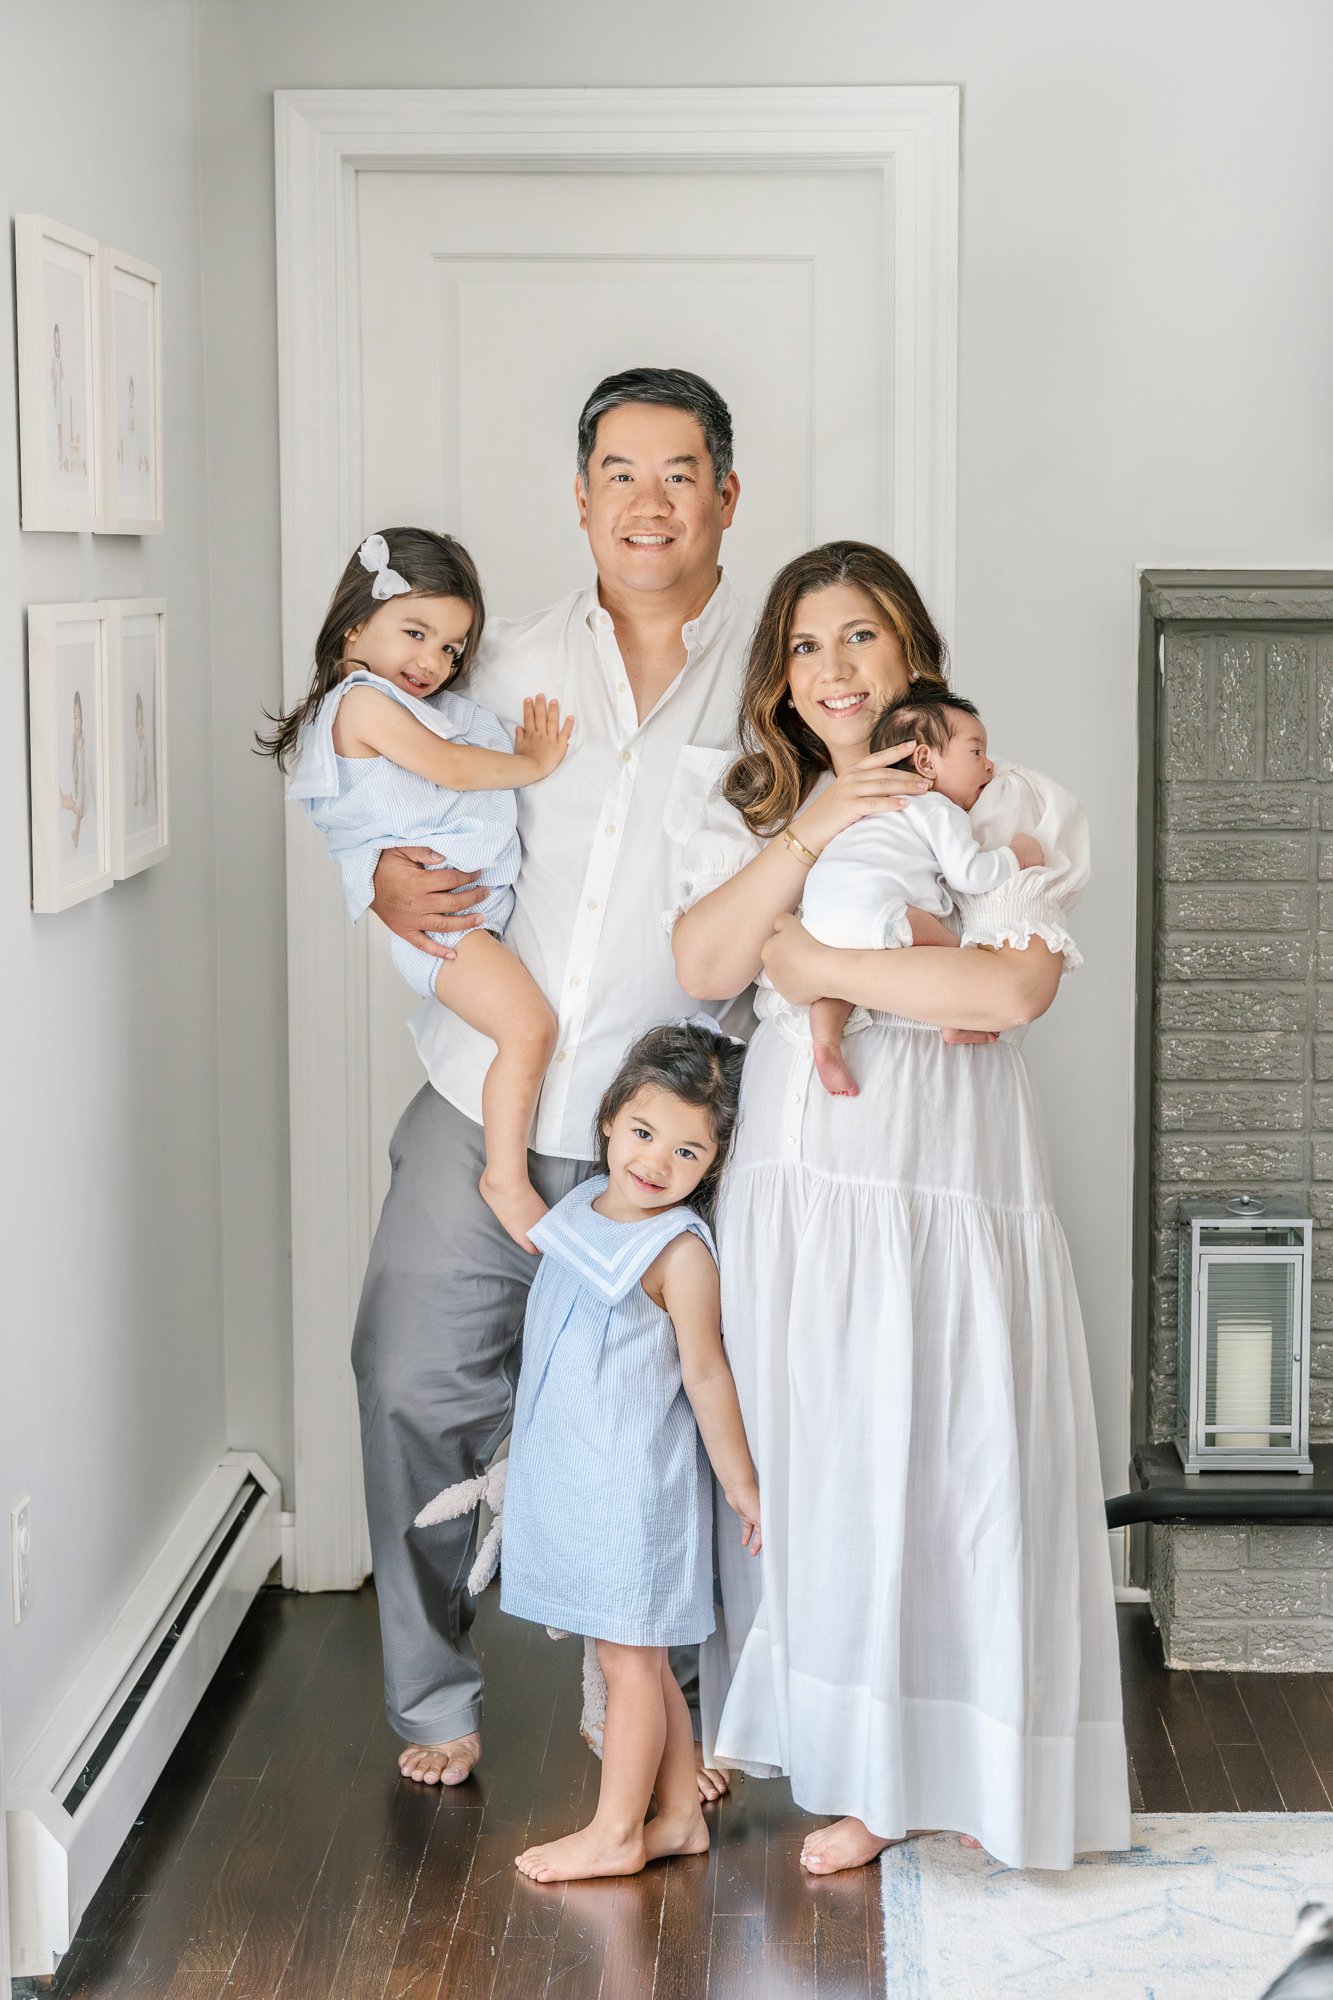  Family with three daughters standing beside their parents together in their home for their in-home newborn portrait session. #newyorkcityphotographer #familyportraits #newbornportraitsession #inhomephotography #familyoffive #familyposeinspo #newjers